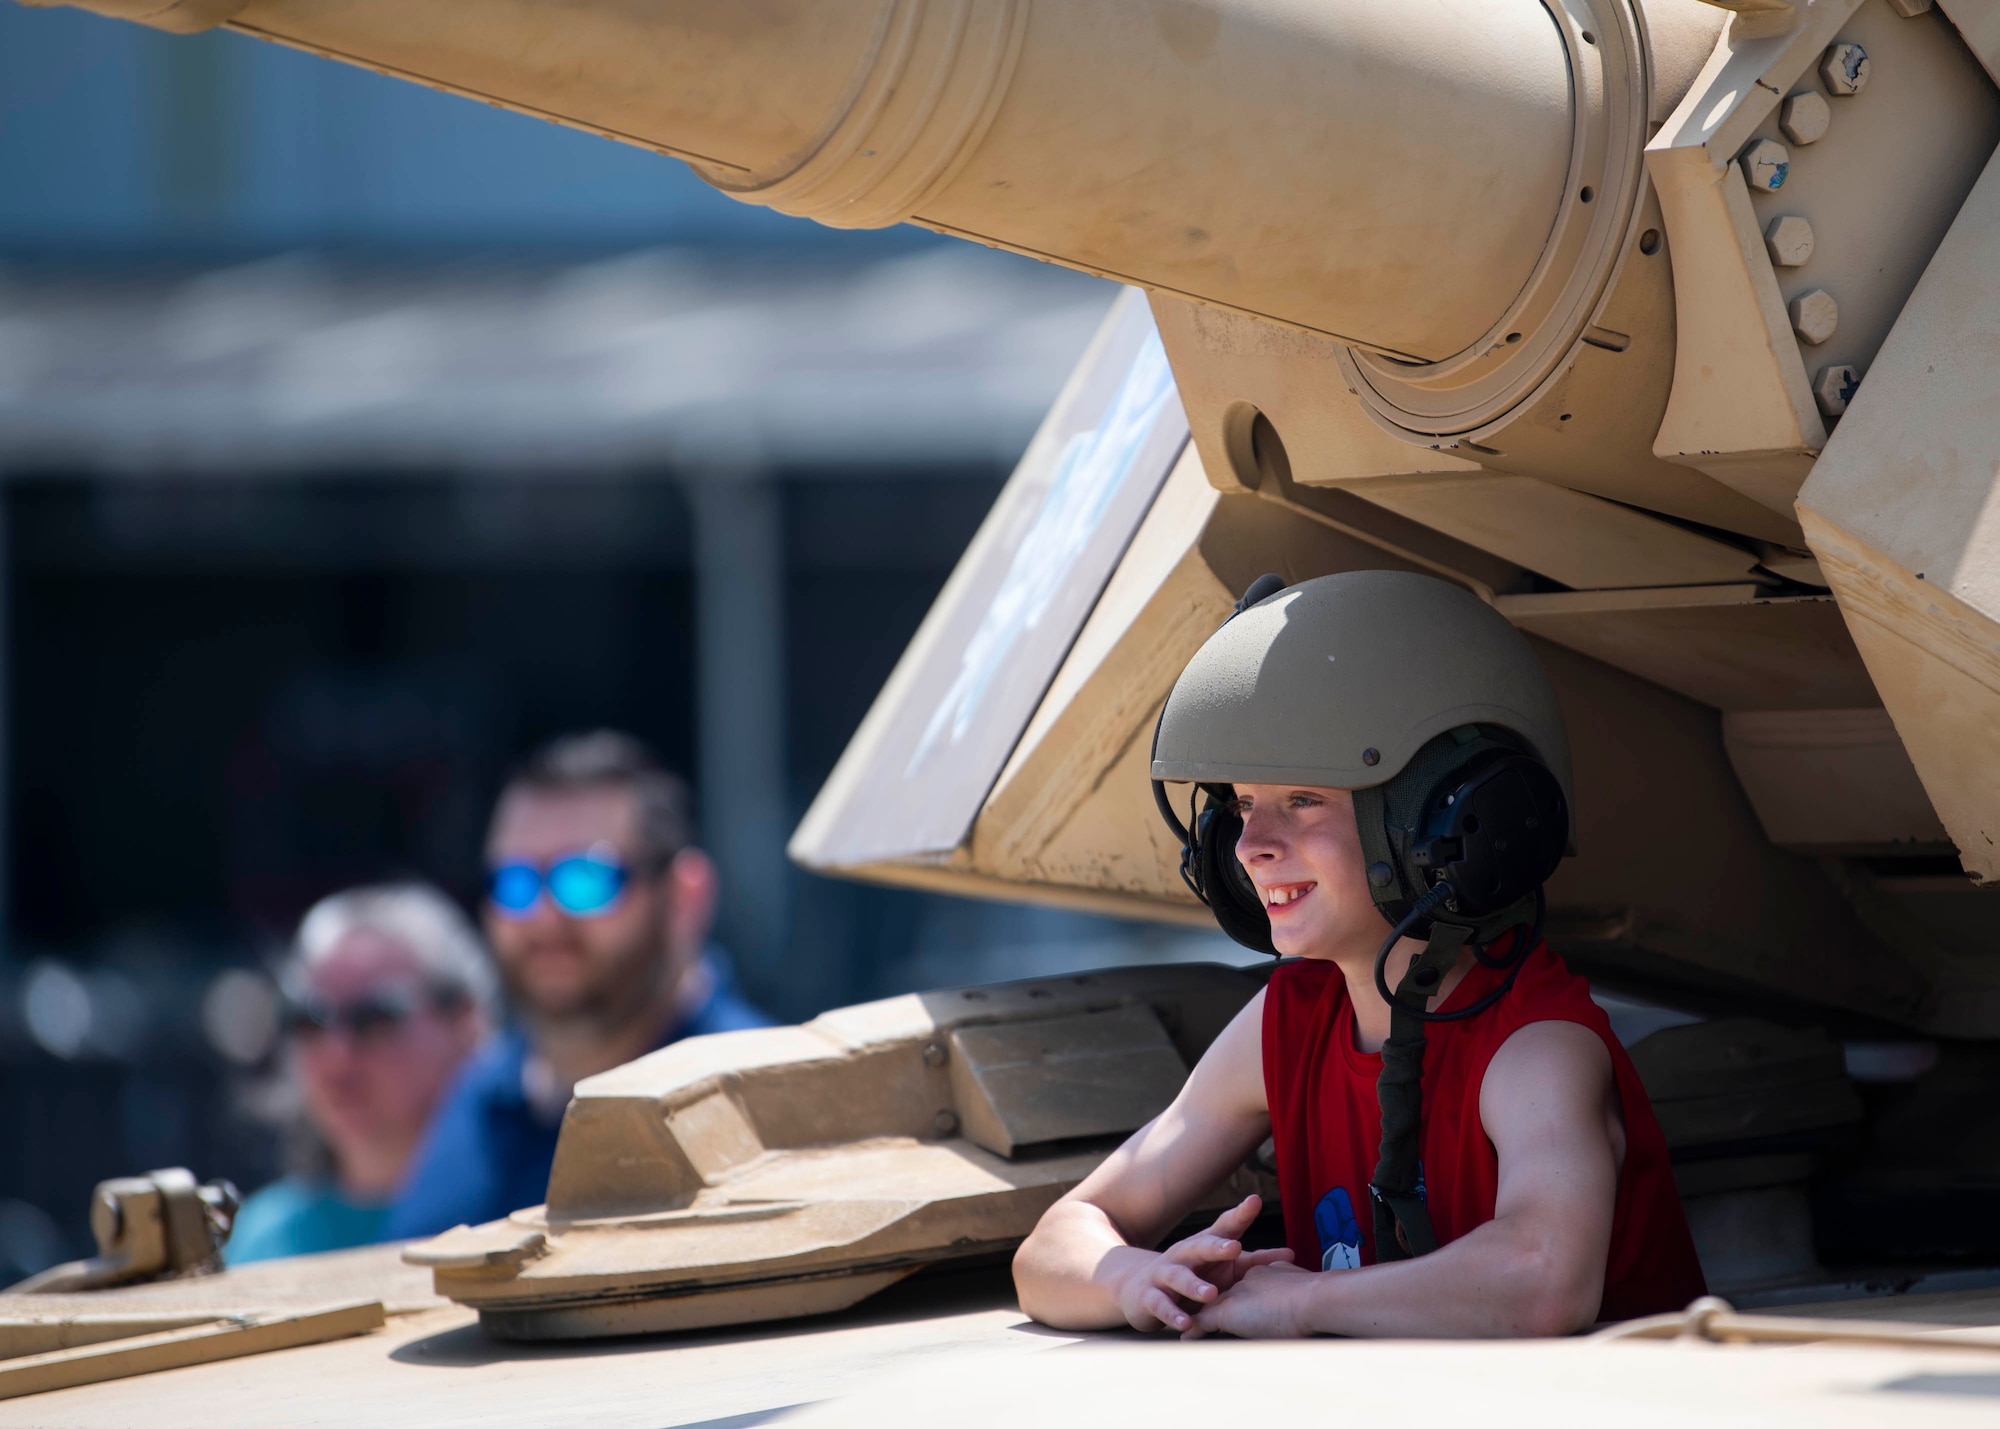 A spectator poses in a M1A1 Abrams during the 2022 Thunder Over Dover Airshow, May 22, 2022, at Dover Air Force Base, Delaware. The show featured more than 20 different military and civilian aircraft from all branches of service. (U.S. Air Force photo by Tech. Sgt. J.D. Strong II)